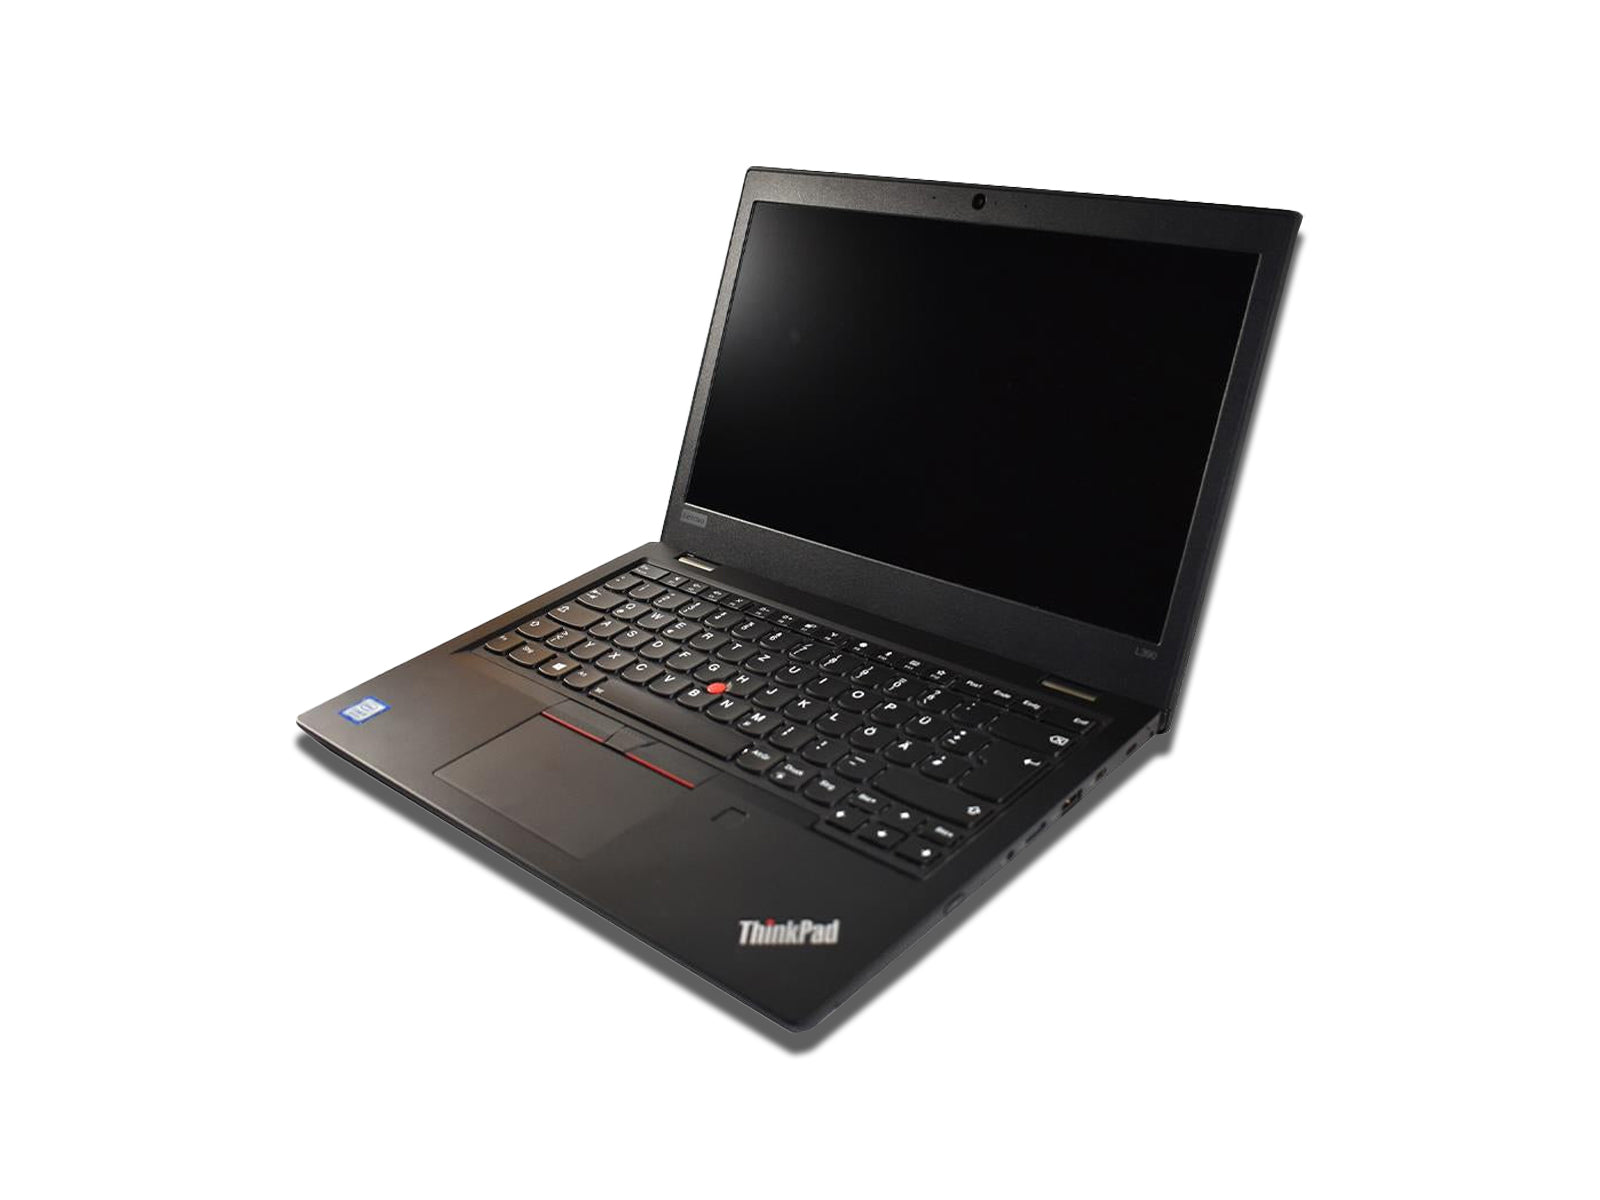 Right Side View of The Lenovo L390 Image on The White Background